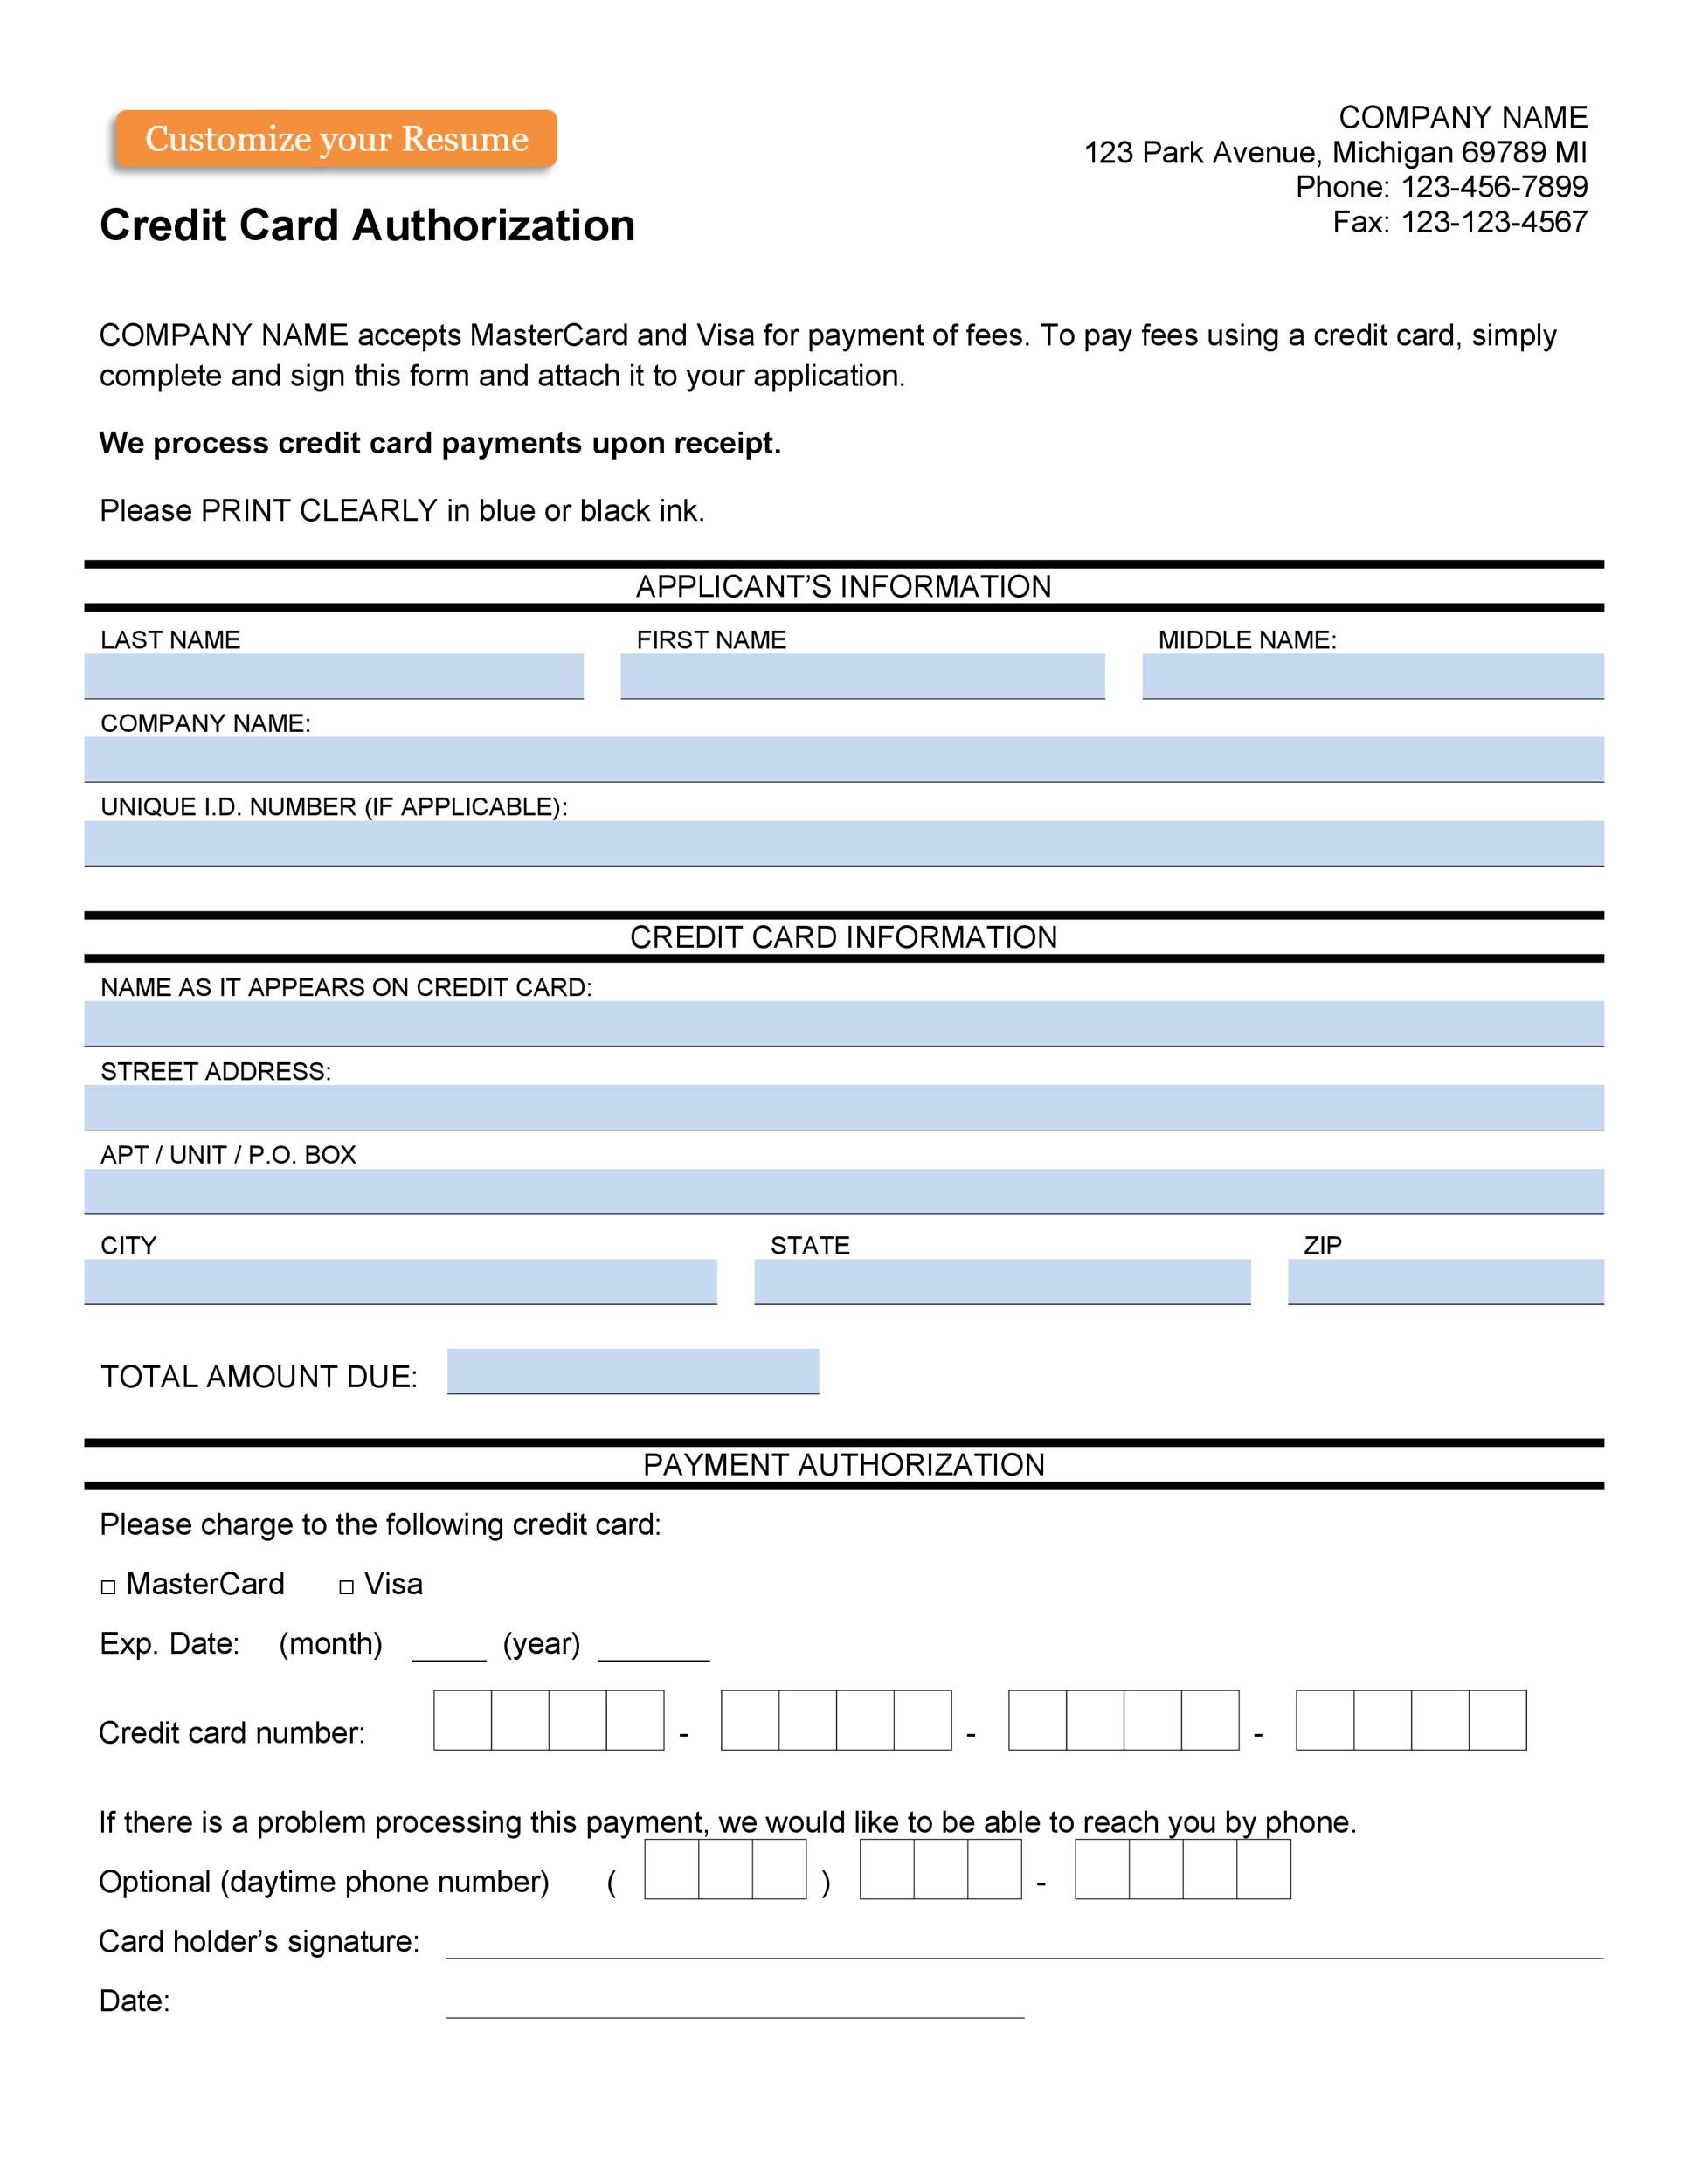 Employee Credit Card Request Form Template - Template Walls